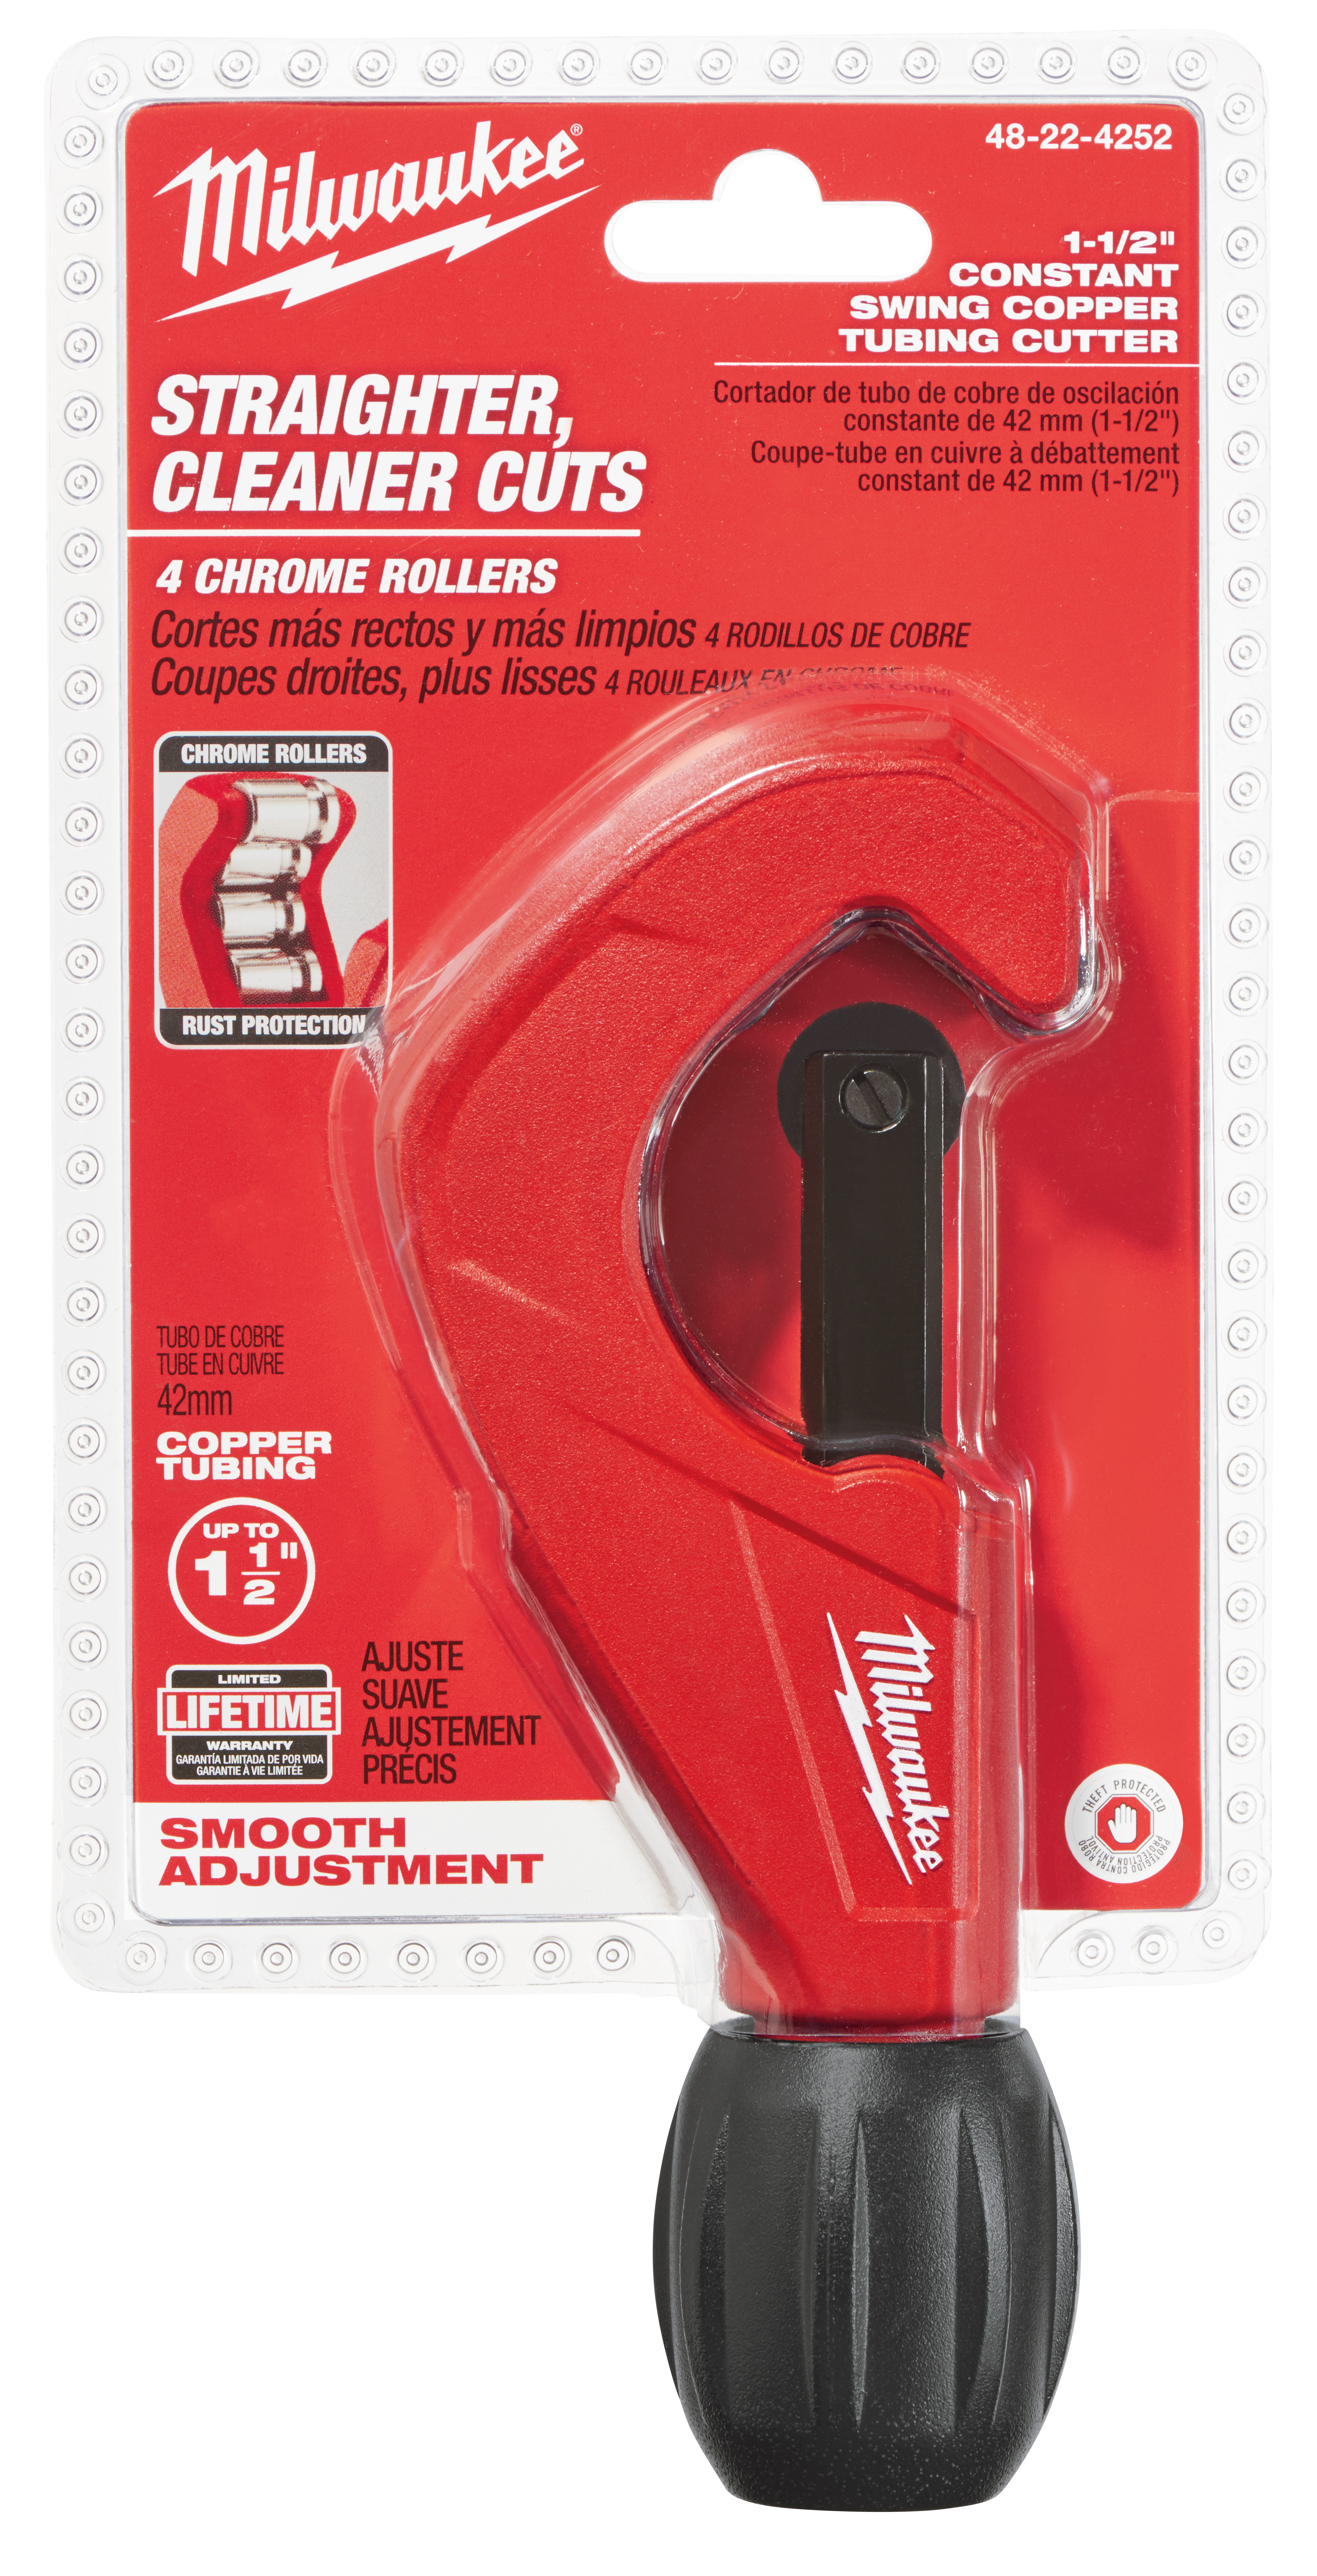 The Milwaukee® 1-1/2 in. constant swing copper tubing cutter is engineered for straighter, cleaner cuts. A 4 roller design delivers accurate cuts and prevents walking. For added durability and extended performance, chrome rollers provide best in class rust protection. An on-board reamer enables fast, easy deburring.